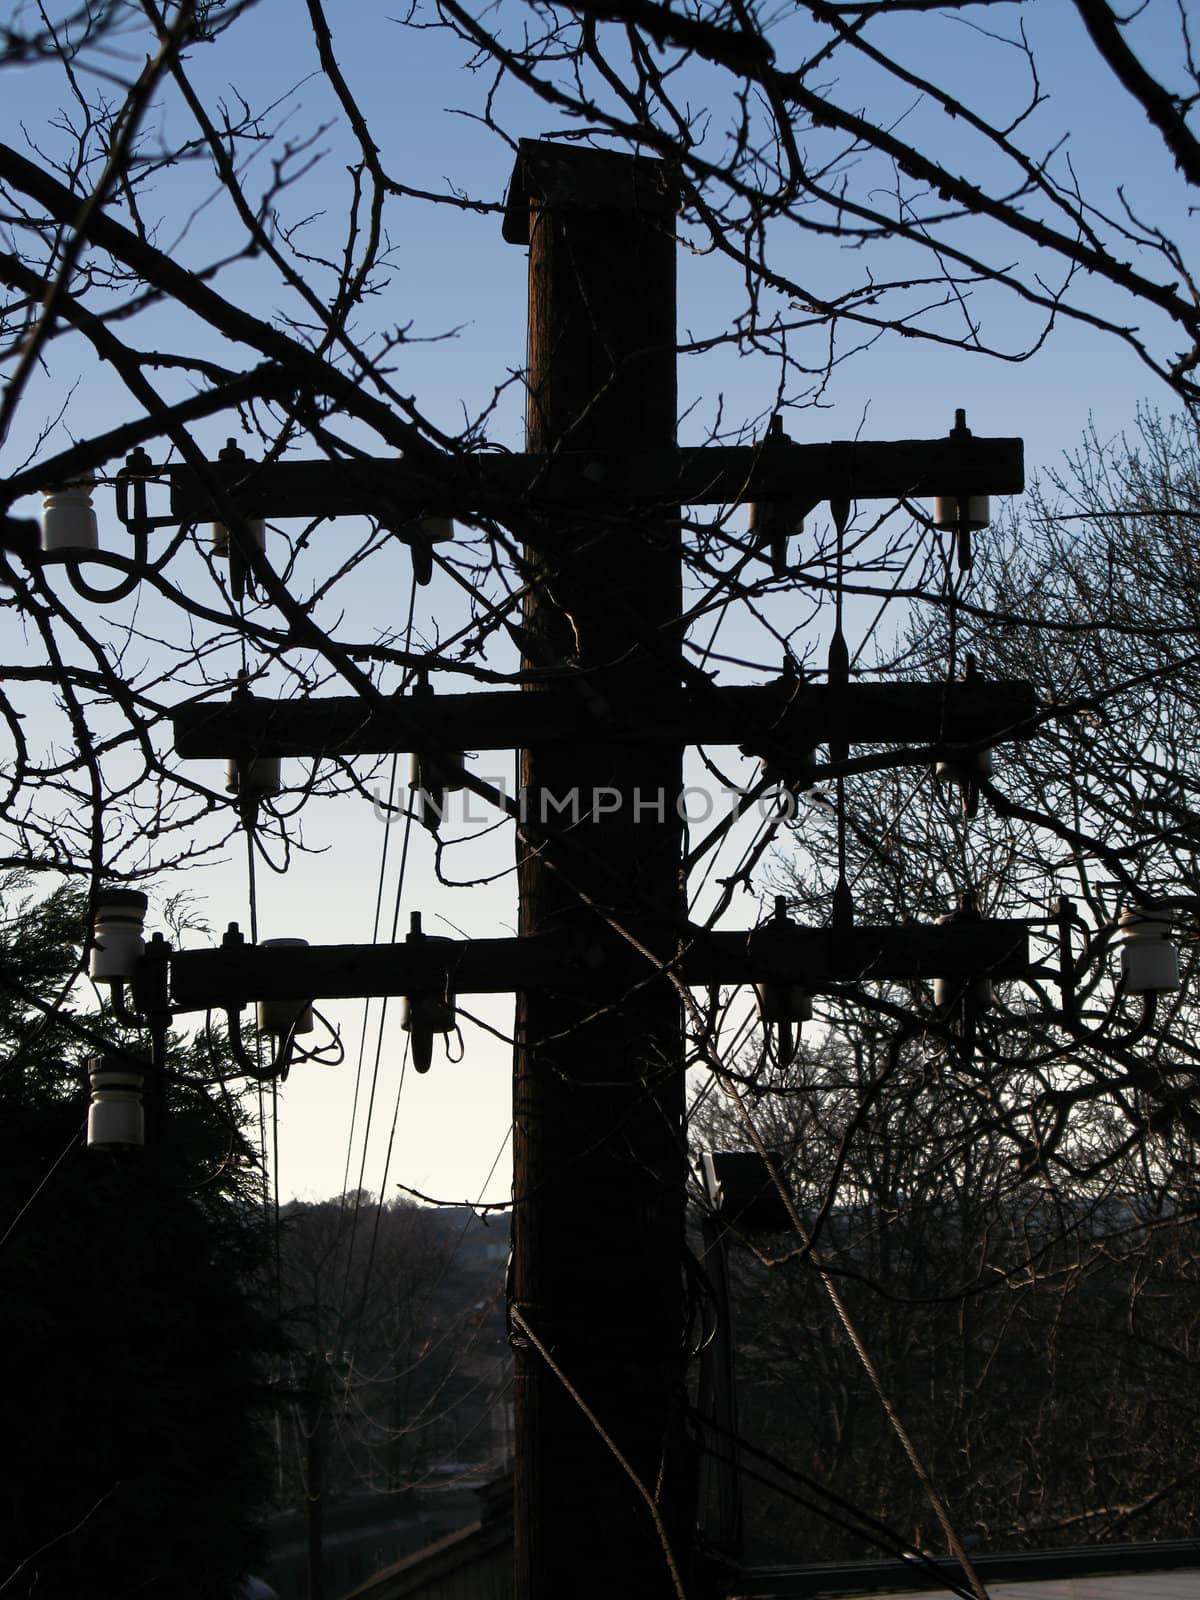 Silhouette of old fashioned telegraph pole


